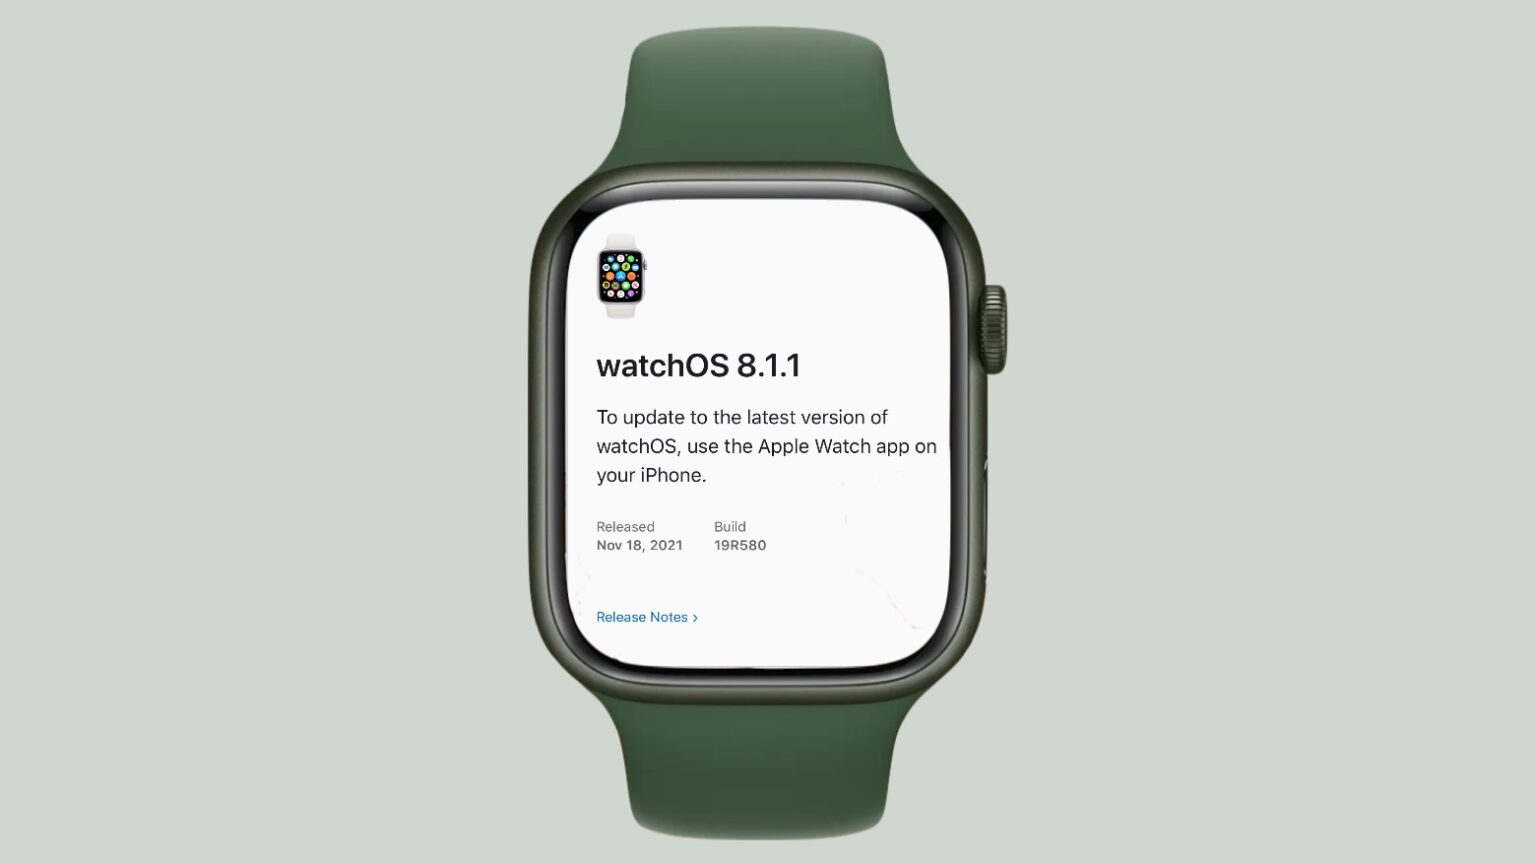 watchOS 8.1.1 removes charging bug on Apple Watch Series 7